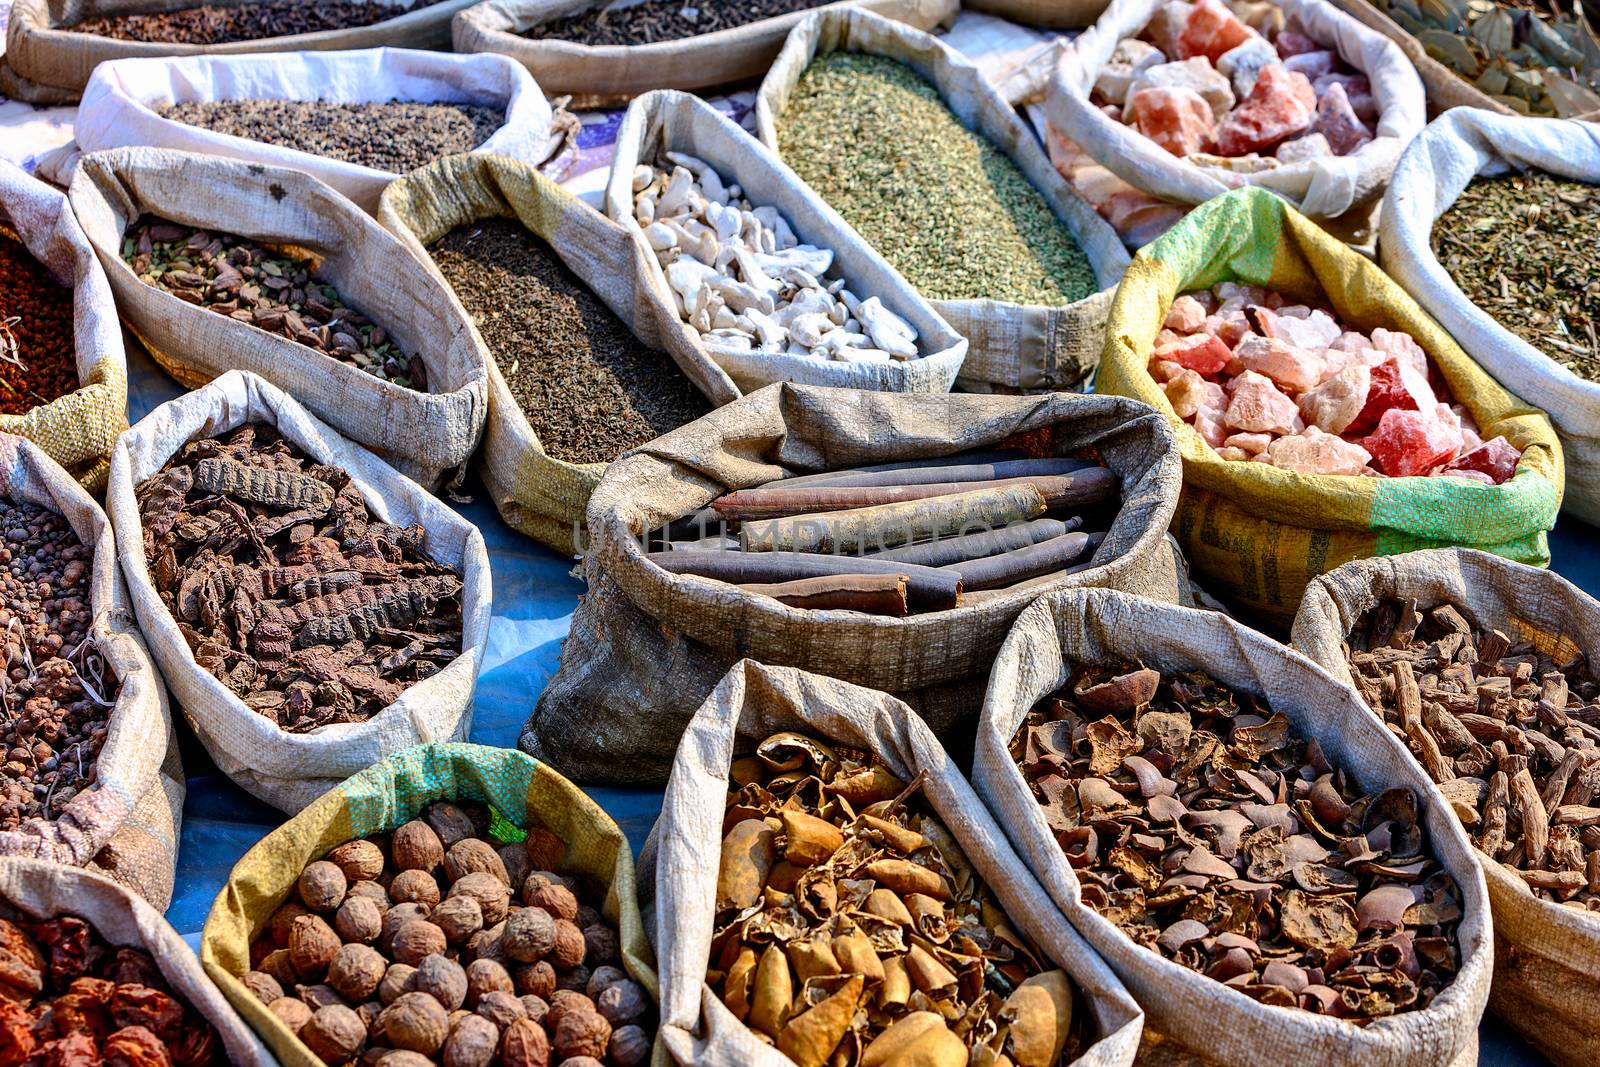 Variety of spices in local market in Pushkar. Rajasthan, India, Asia